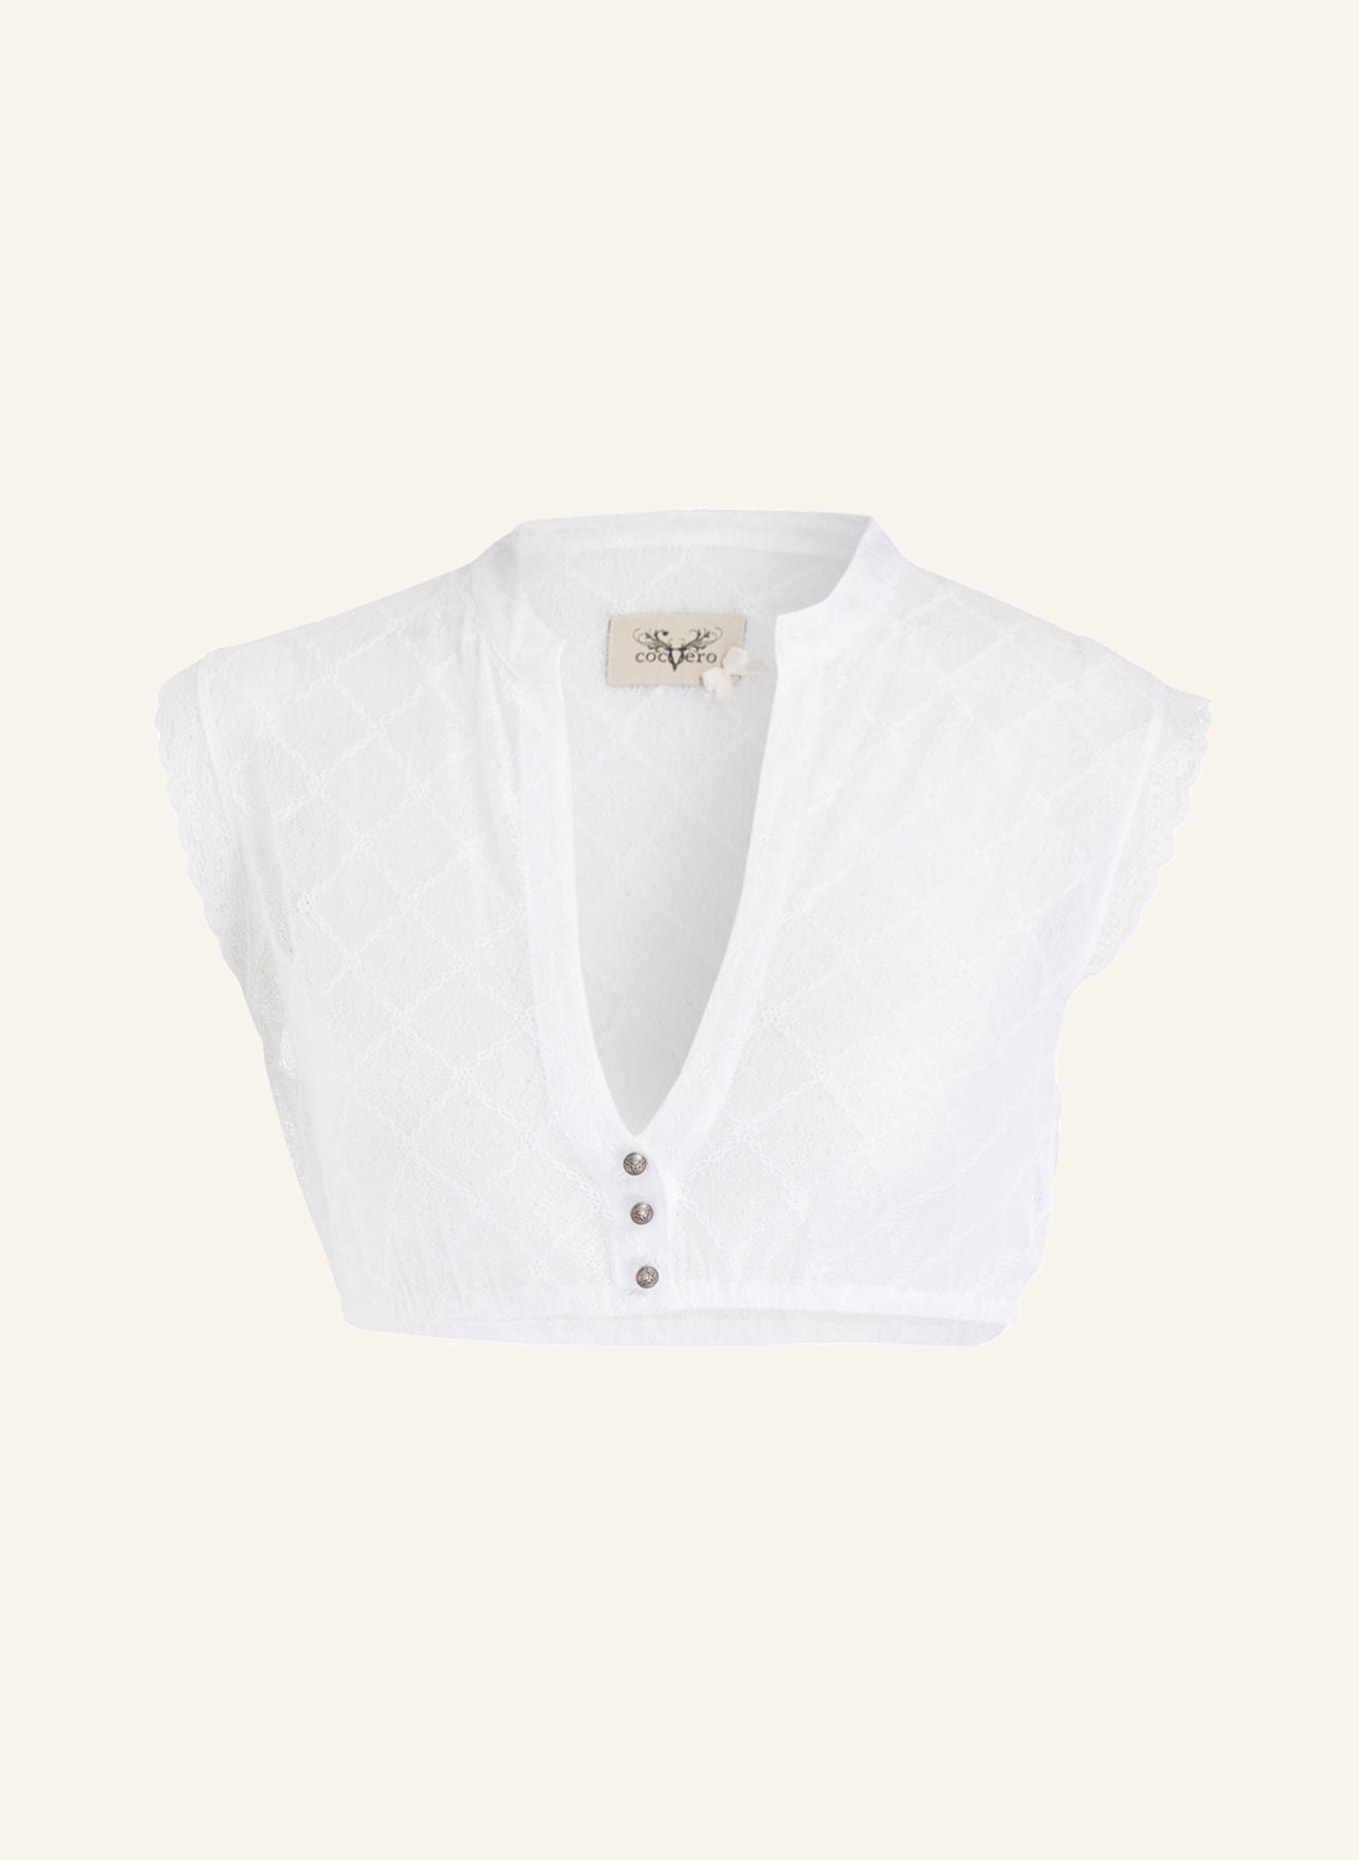 CocoVero Dirndl blouse FRANZI, Color: WEISS (Image 1)